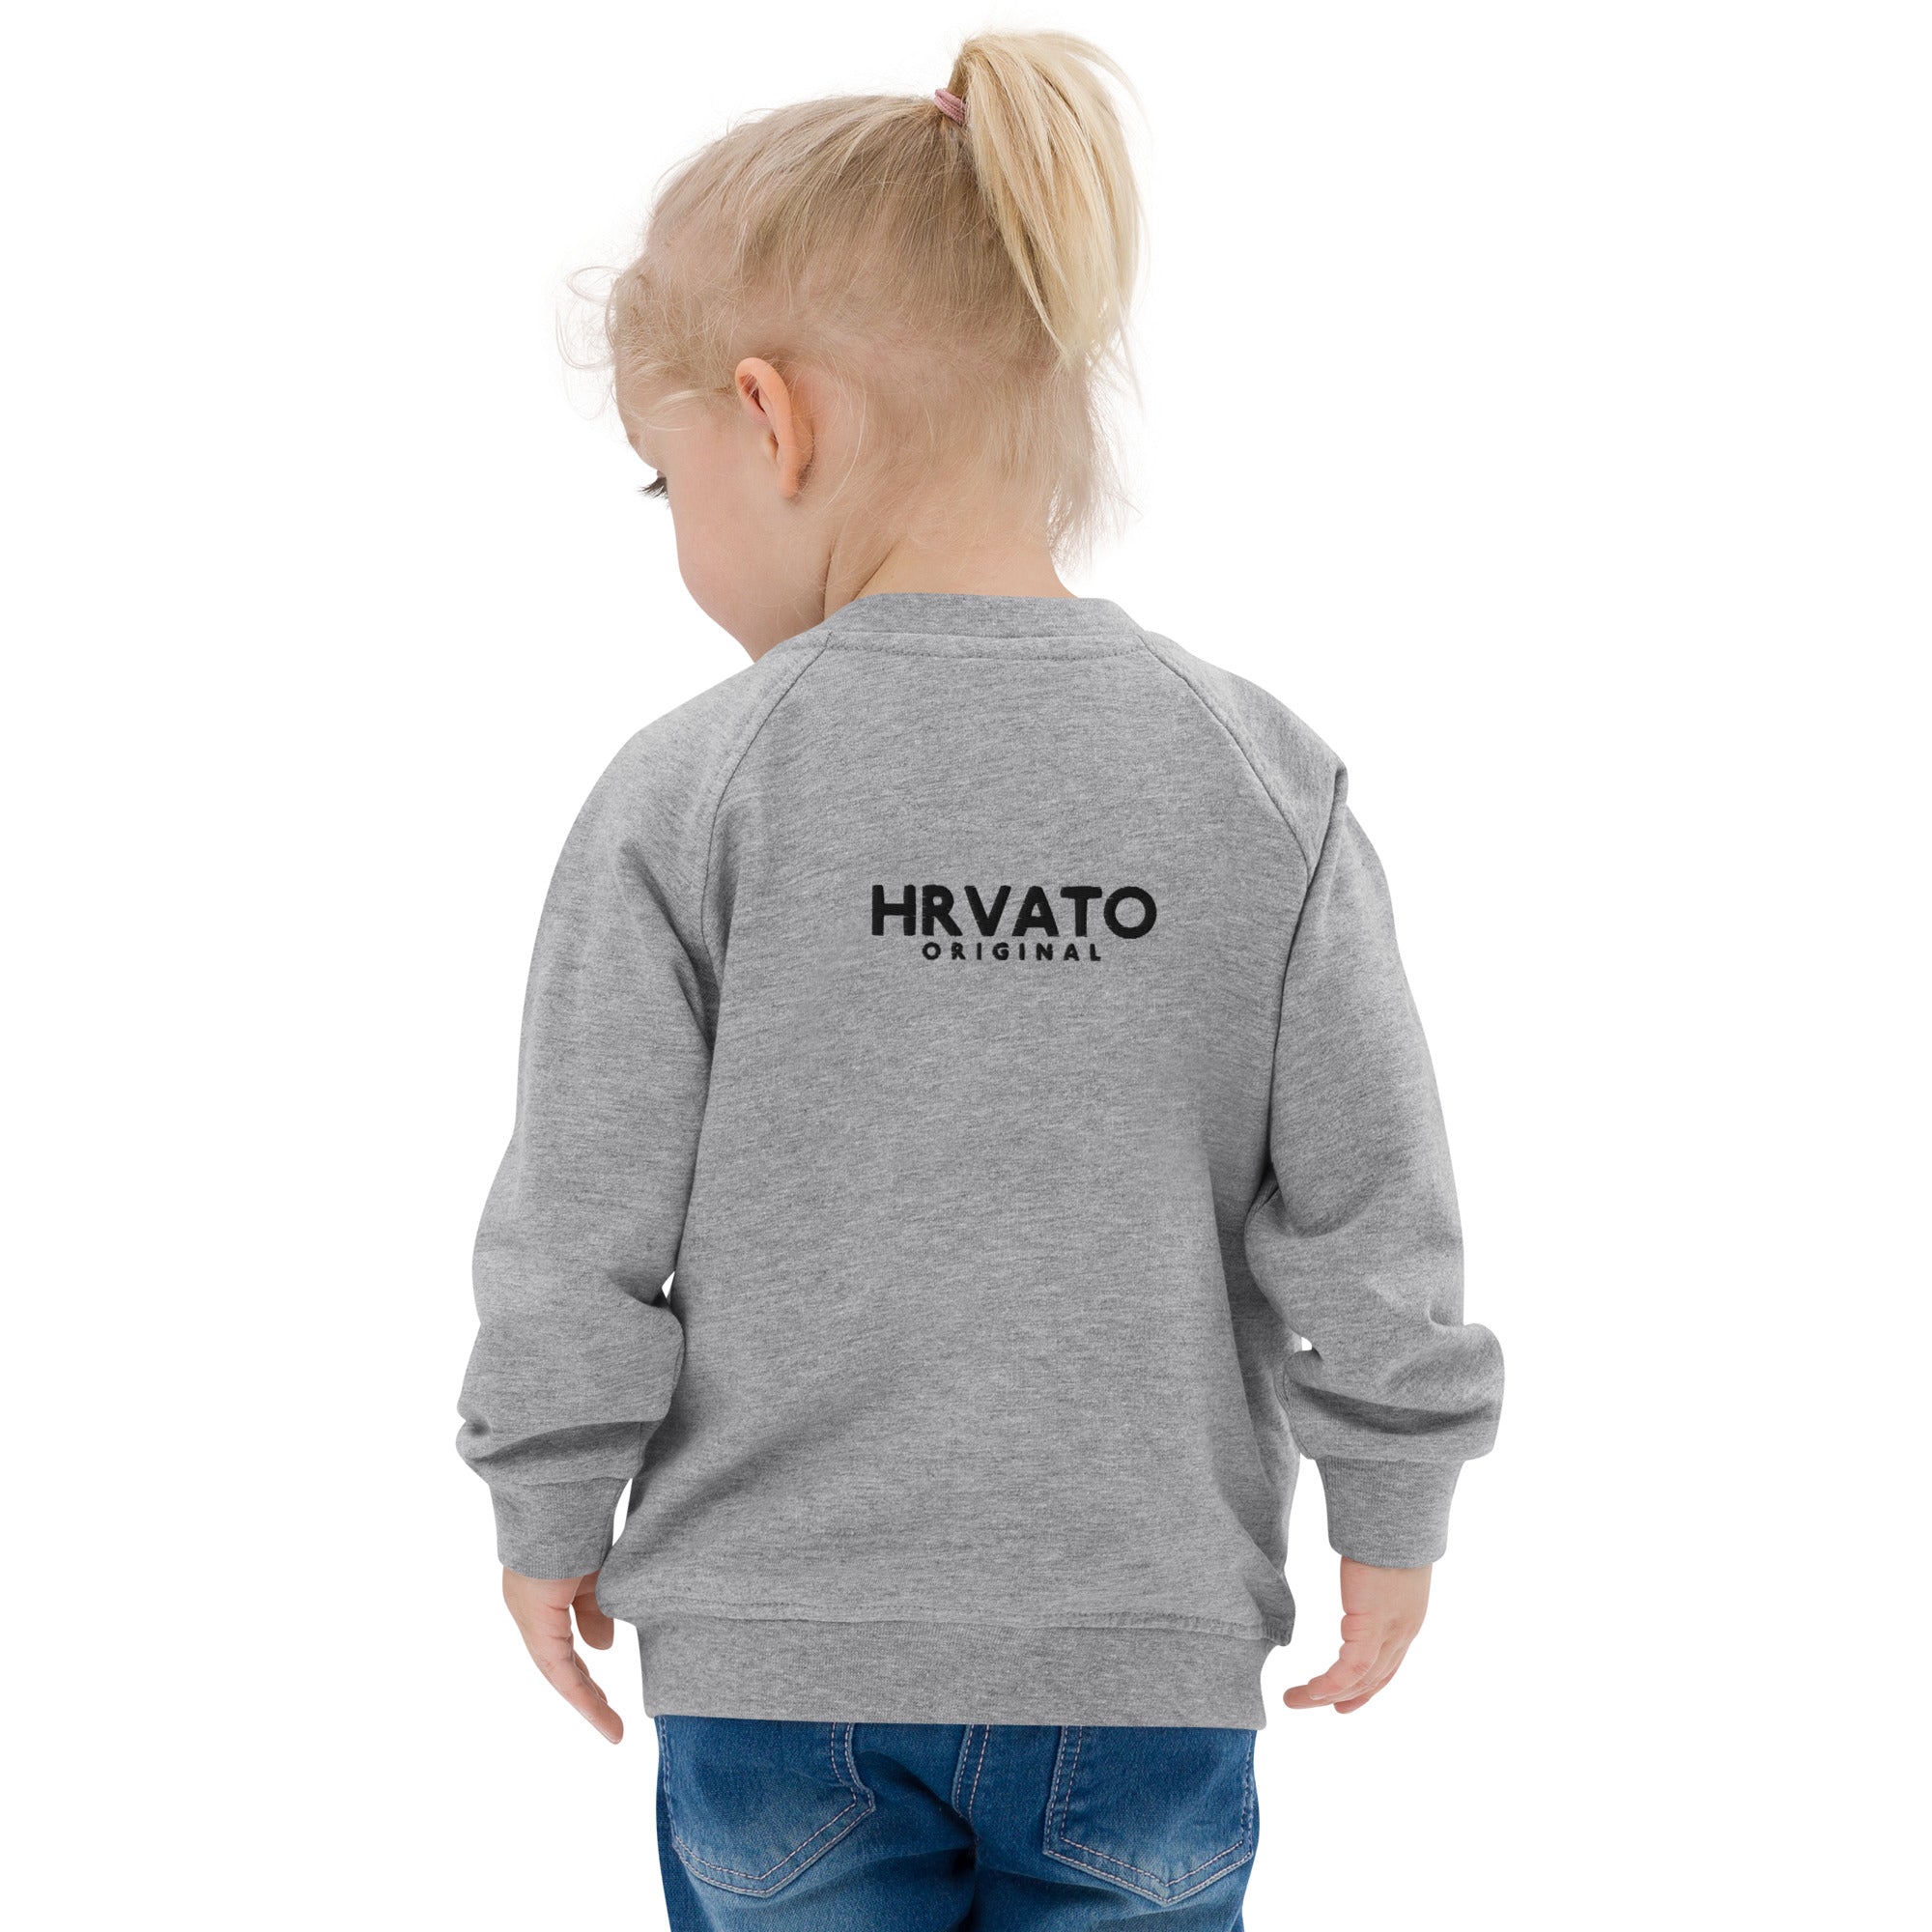 Girls Organic Bomber Jacket HRVATO Embroidery